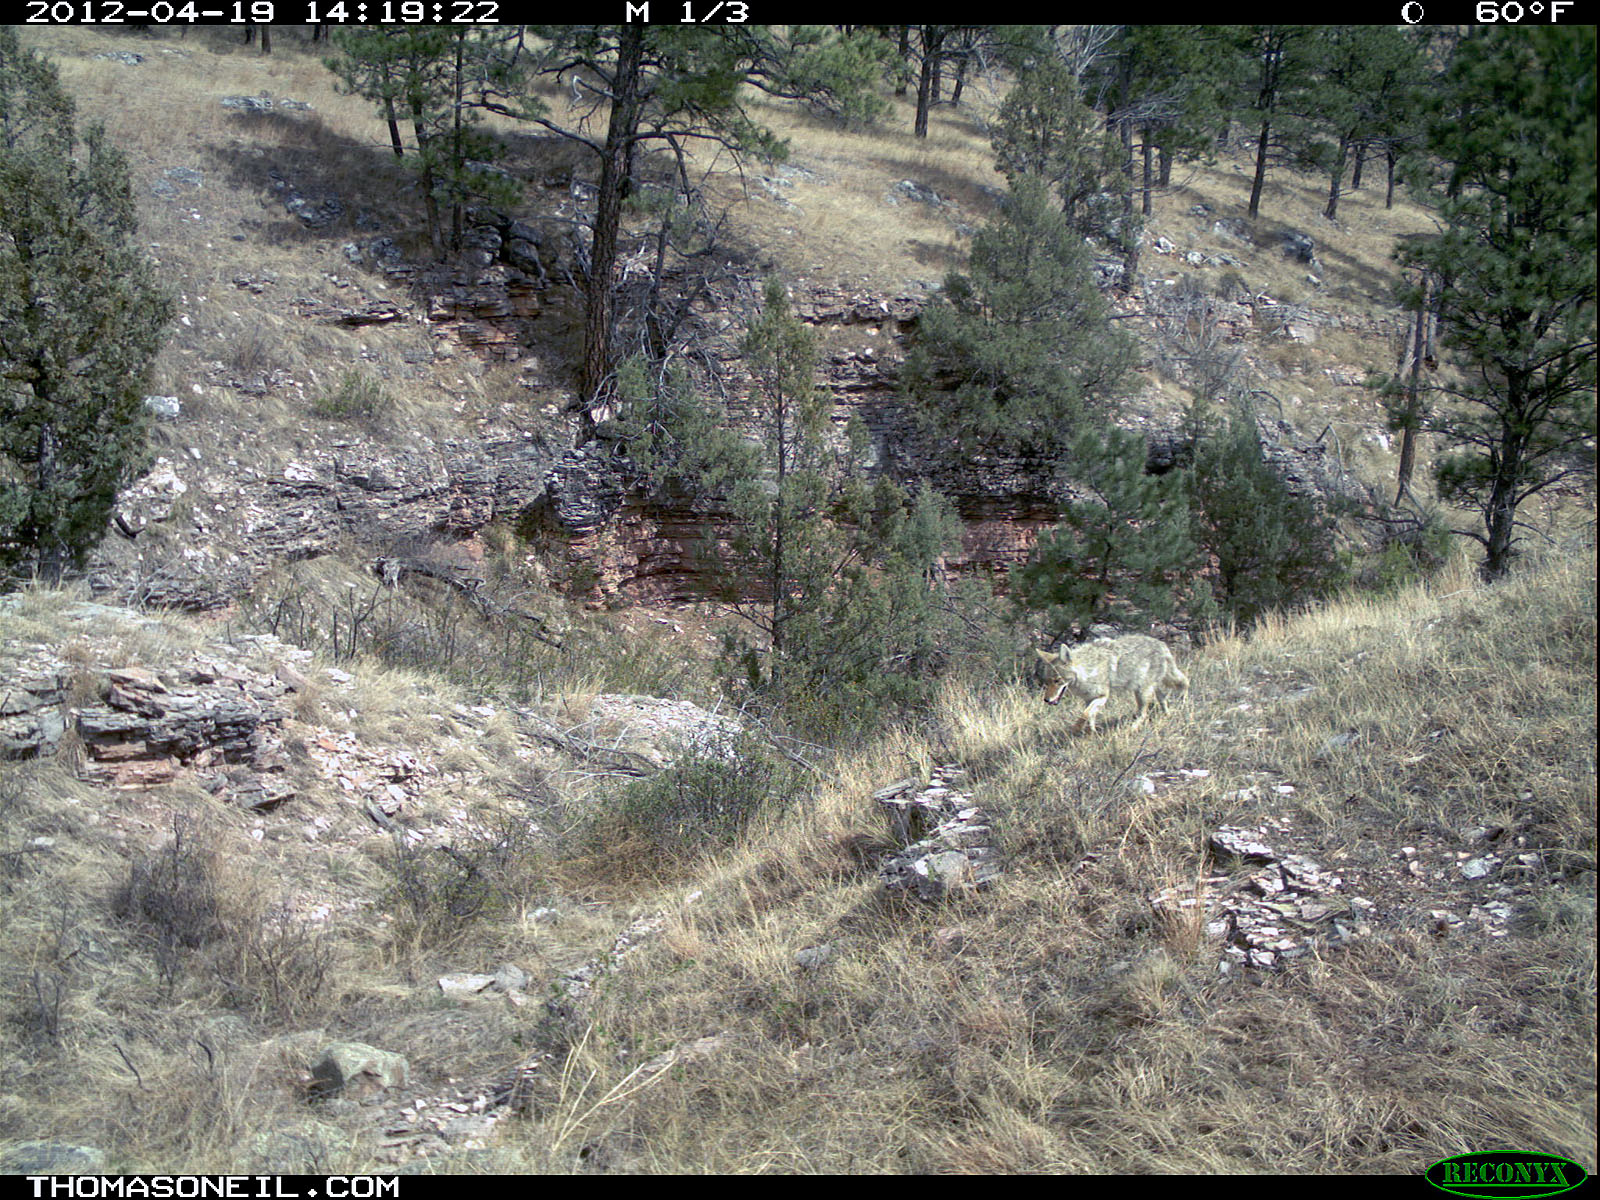 Trailcam picture of coyote, Wind Cave National Park, April 19.  Click for next photo.